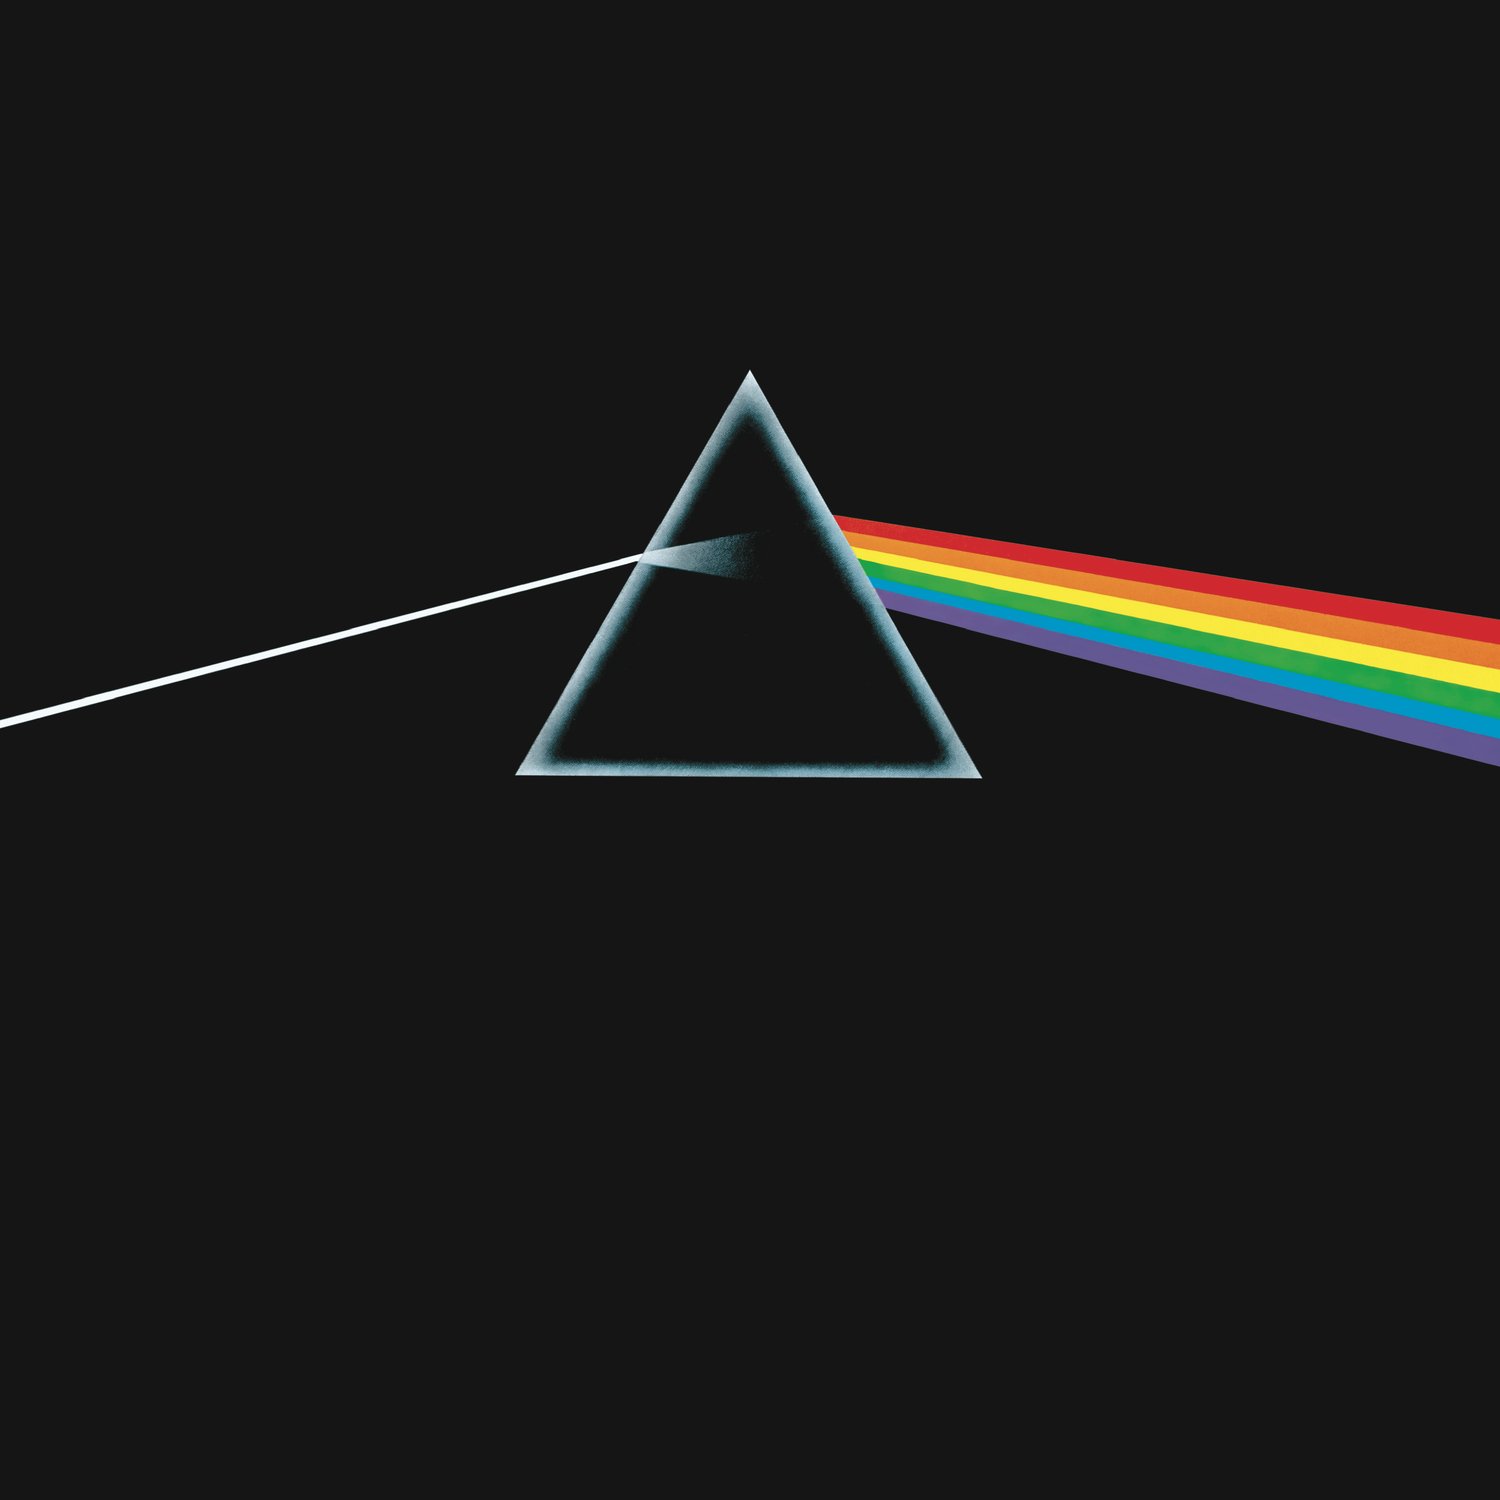 Dark Side of The Moon Details